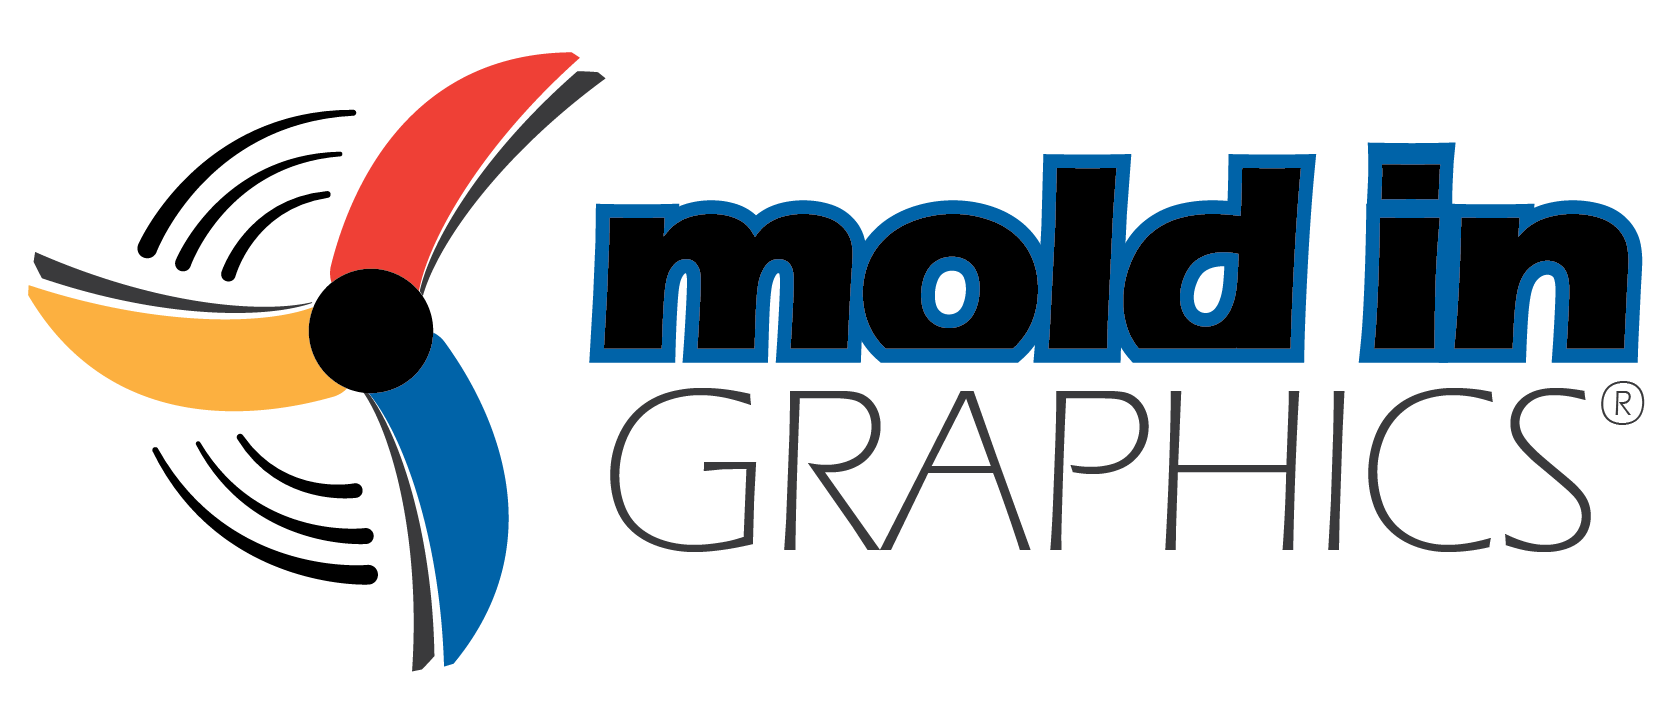 Mold In Graphic Systems Celebrates over 30 Years in Branding Plastics